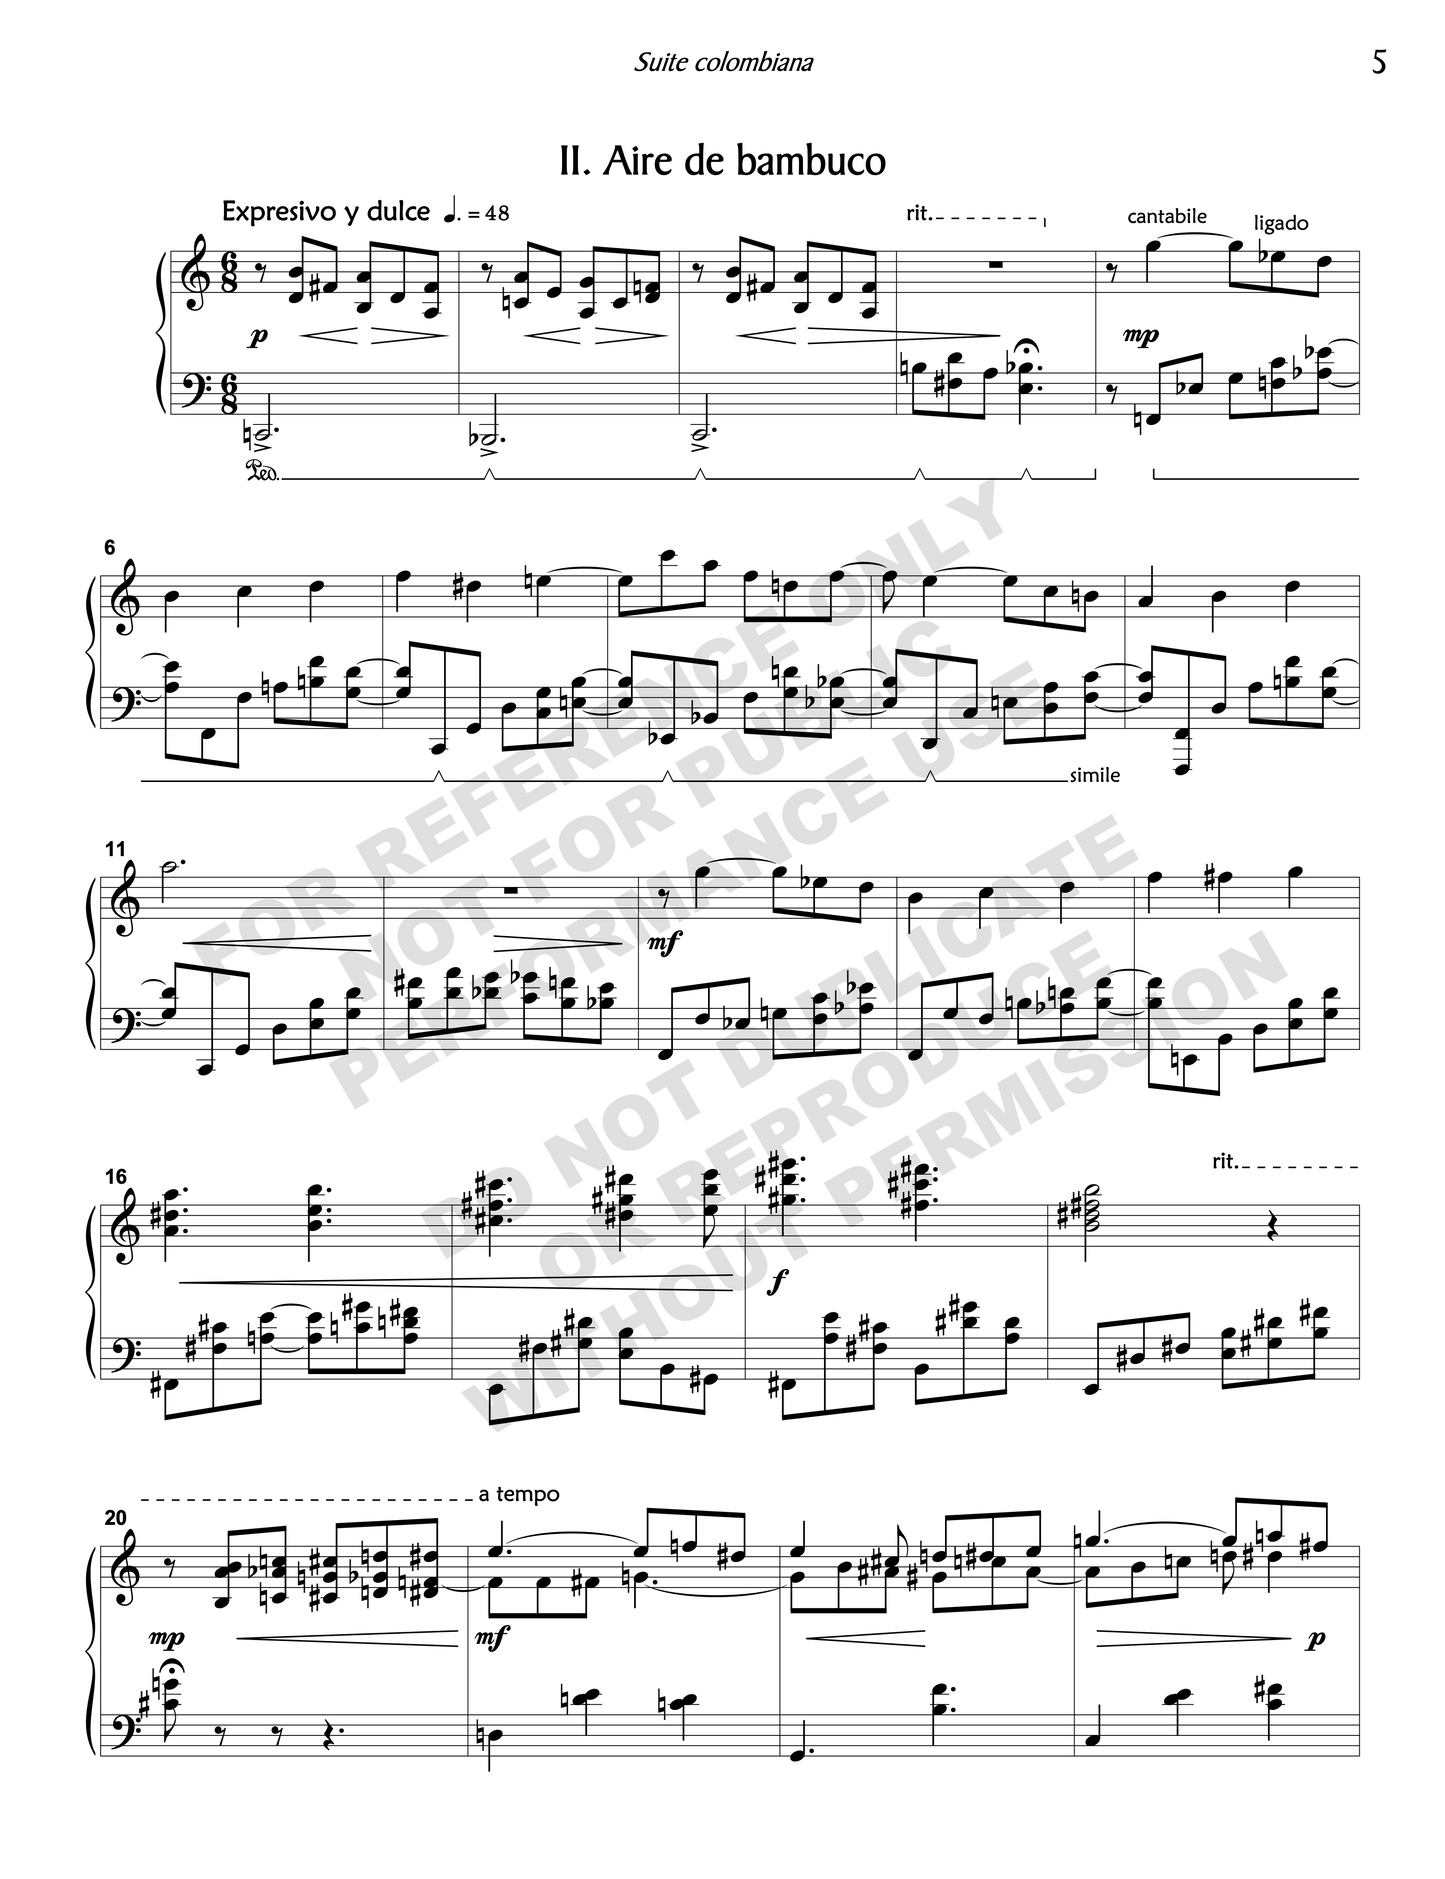 Suite colombiana, for solo piano